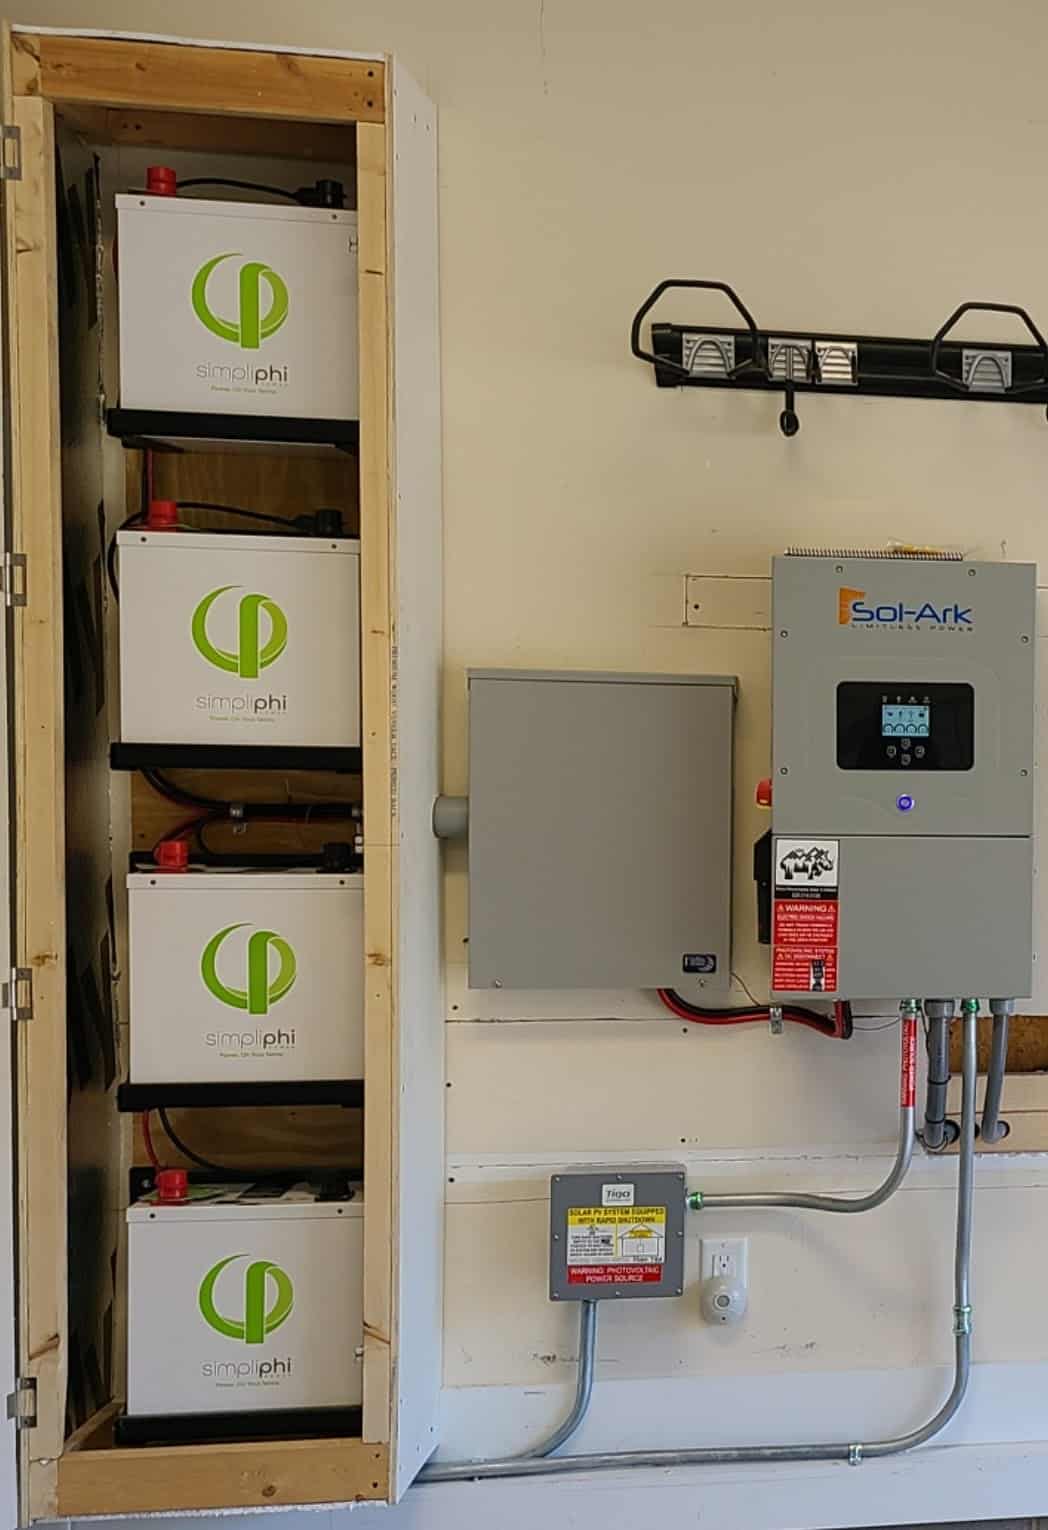 solark multi use inverter and simpliphi battery bank by rhino renewables